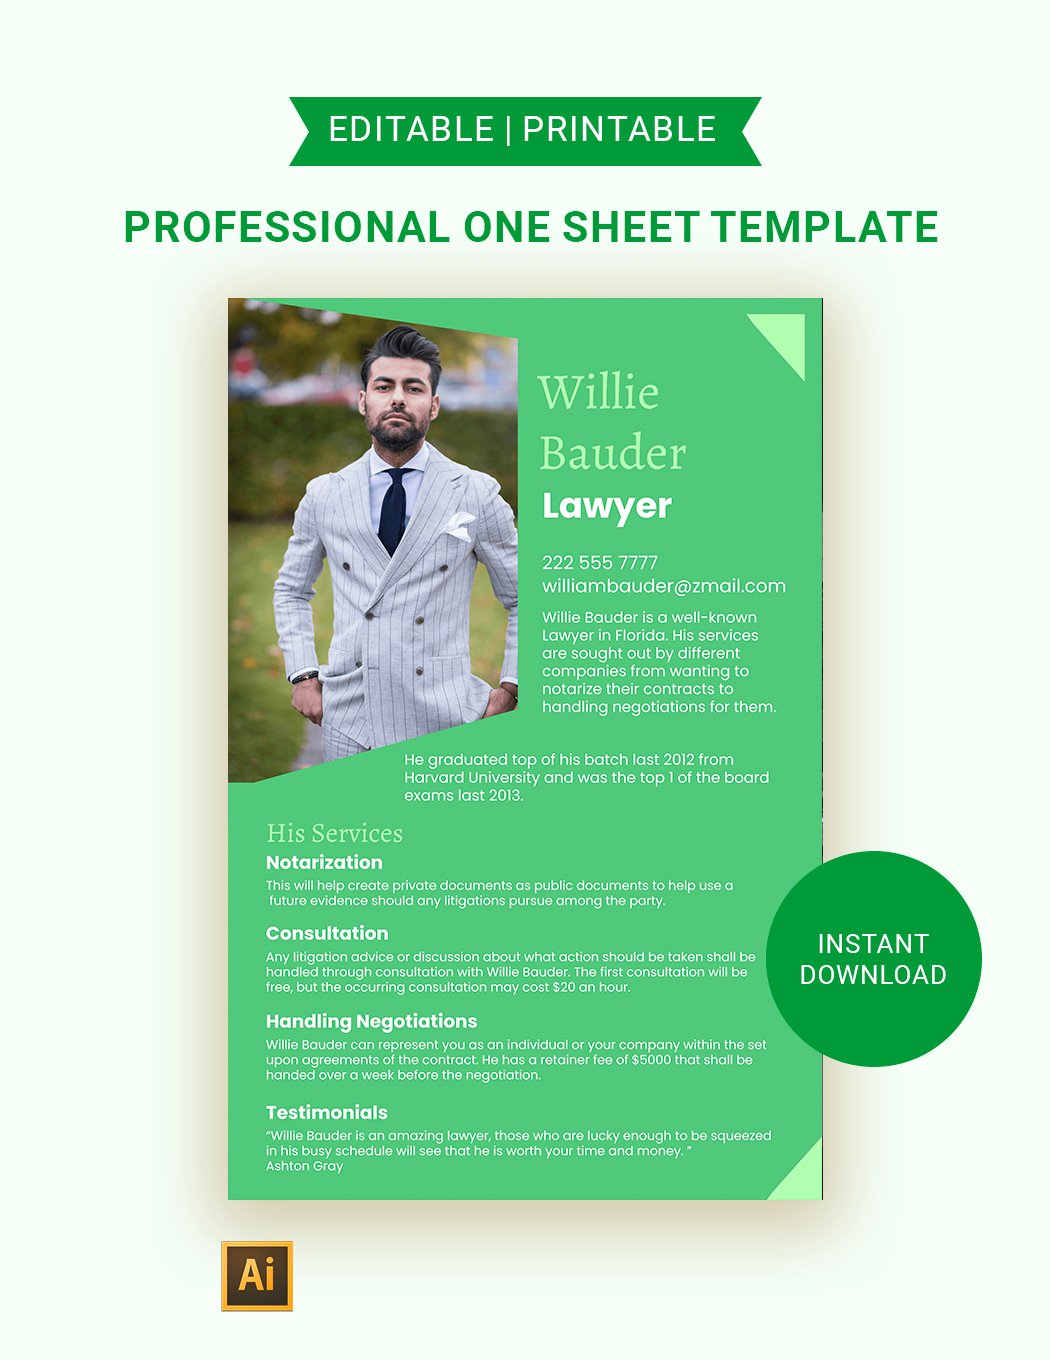 Professional One Sheet Template